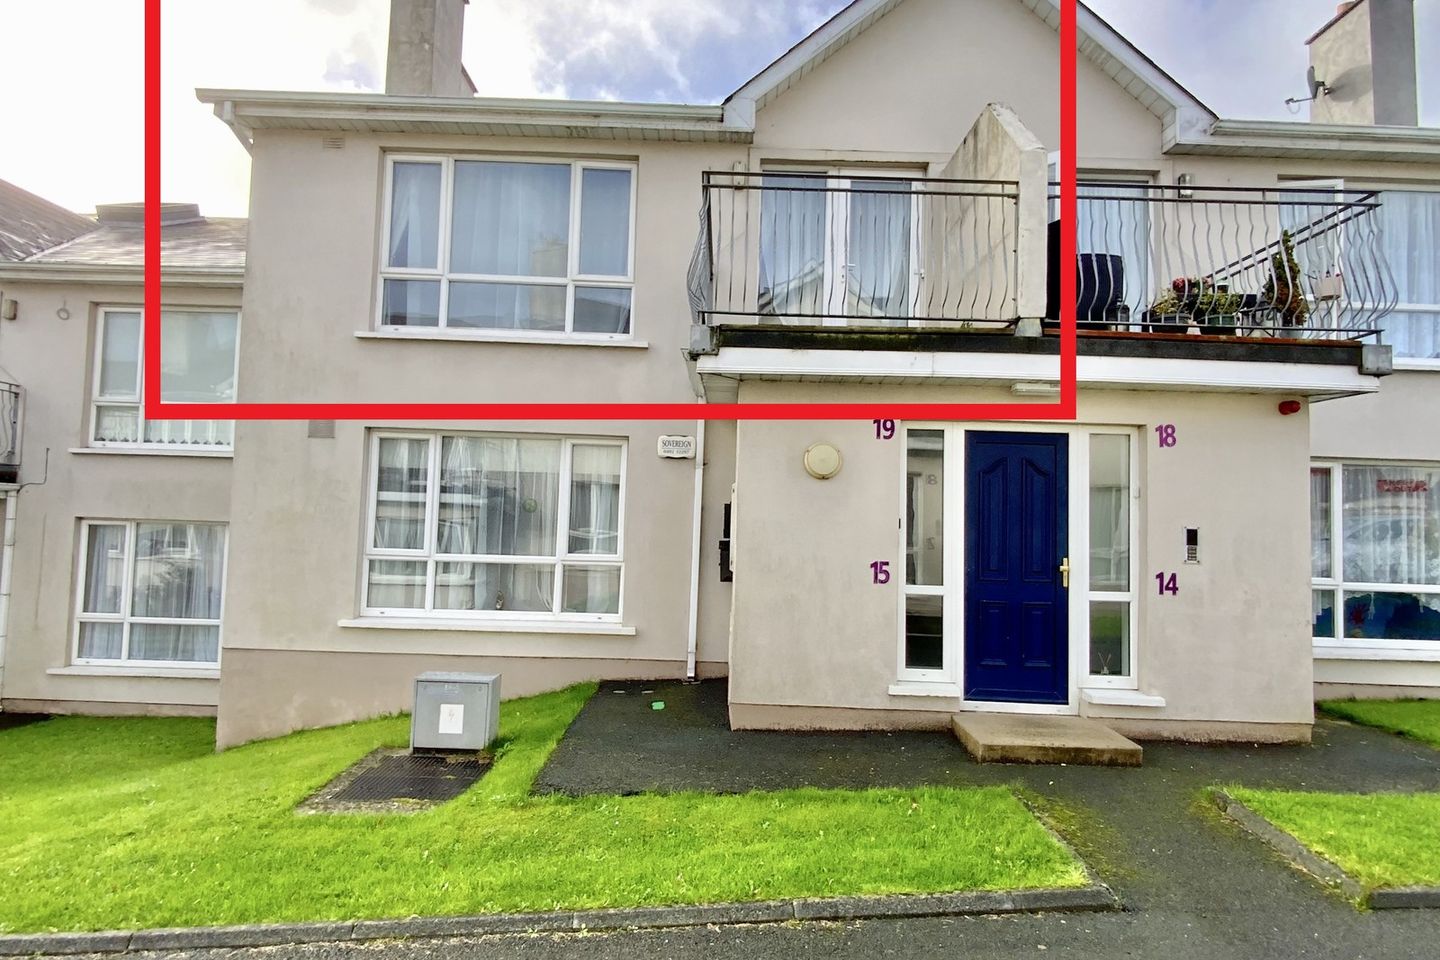 19 Townville, Saint Mary's Road, Arklow, Co. Wicklow